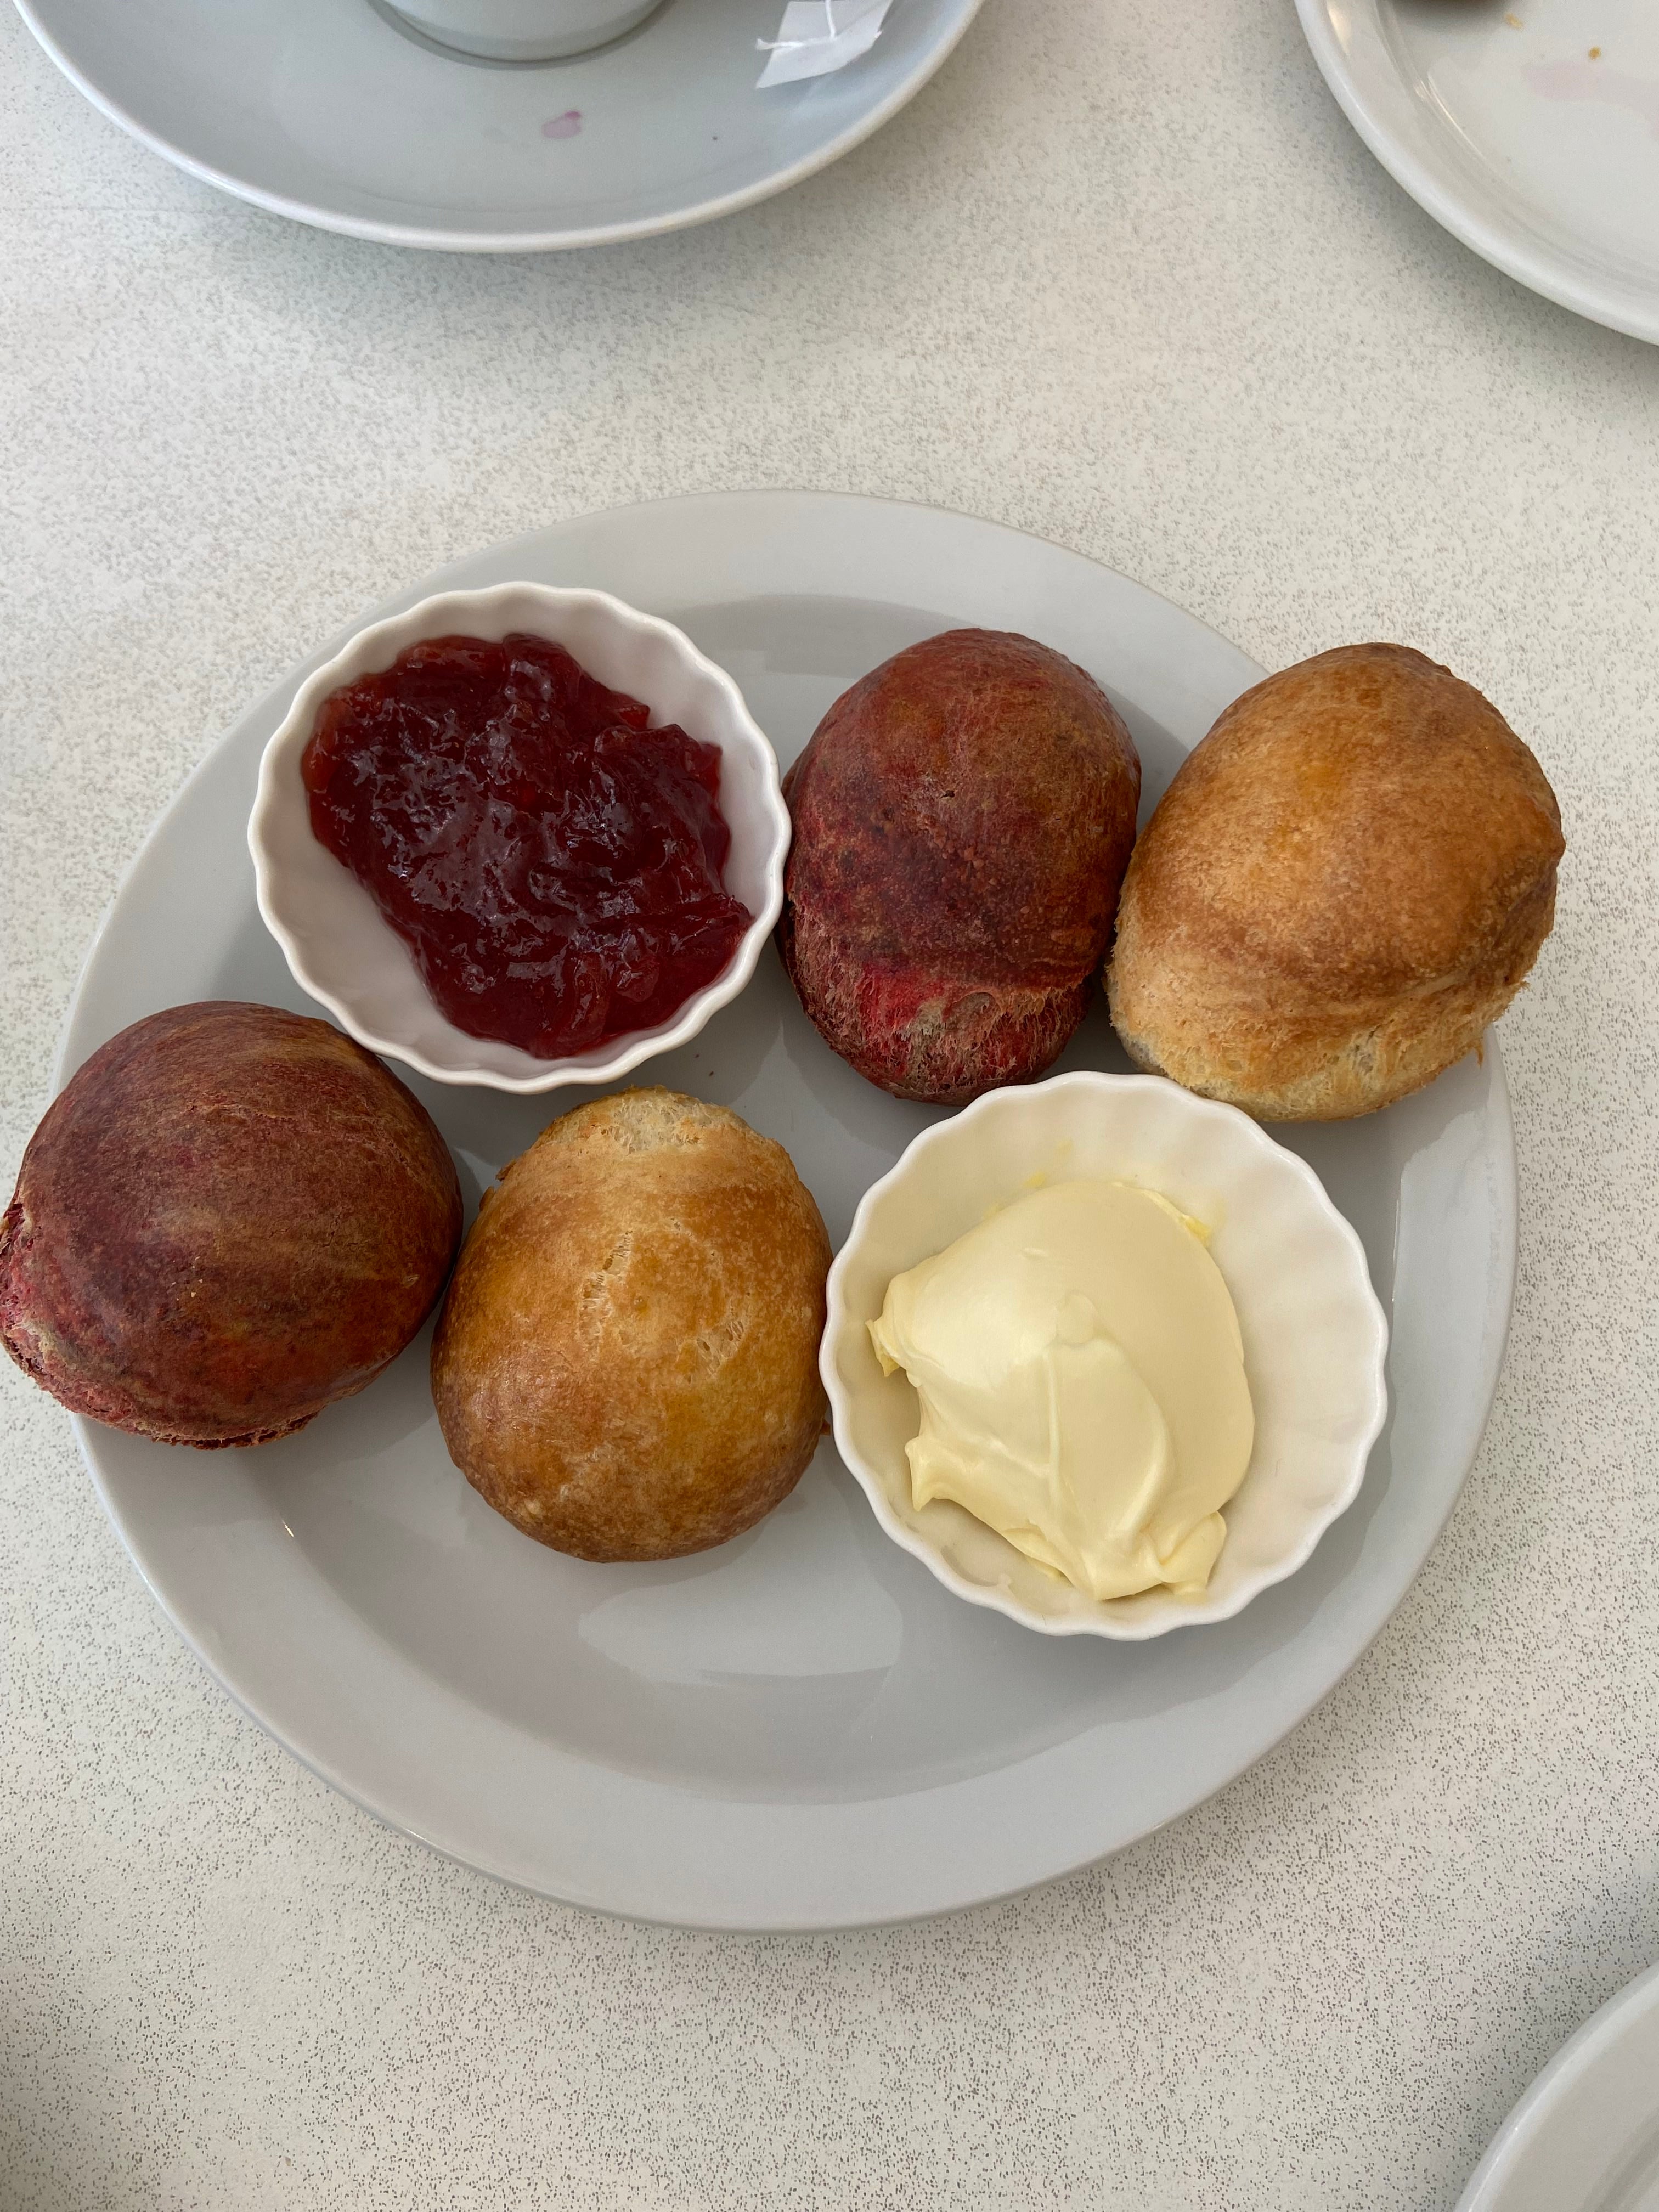 Scones with clotted cream and jam